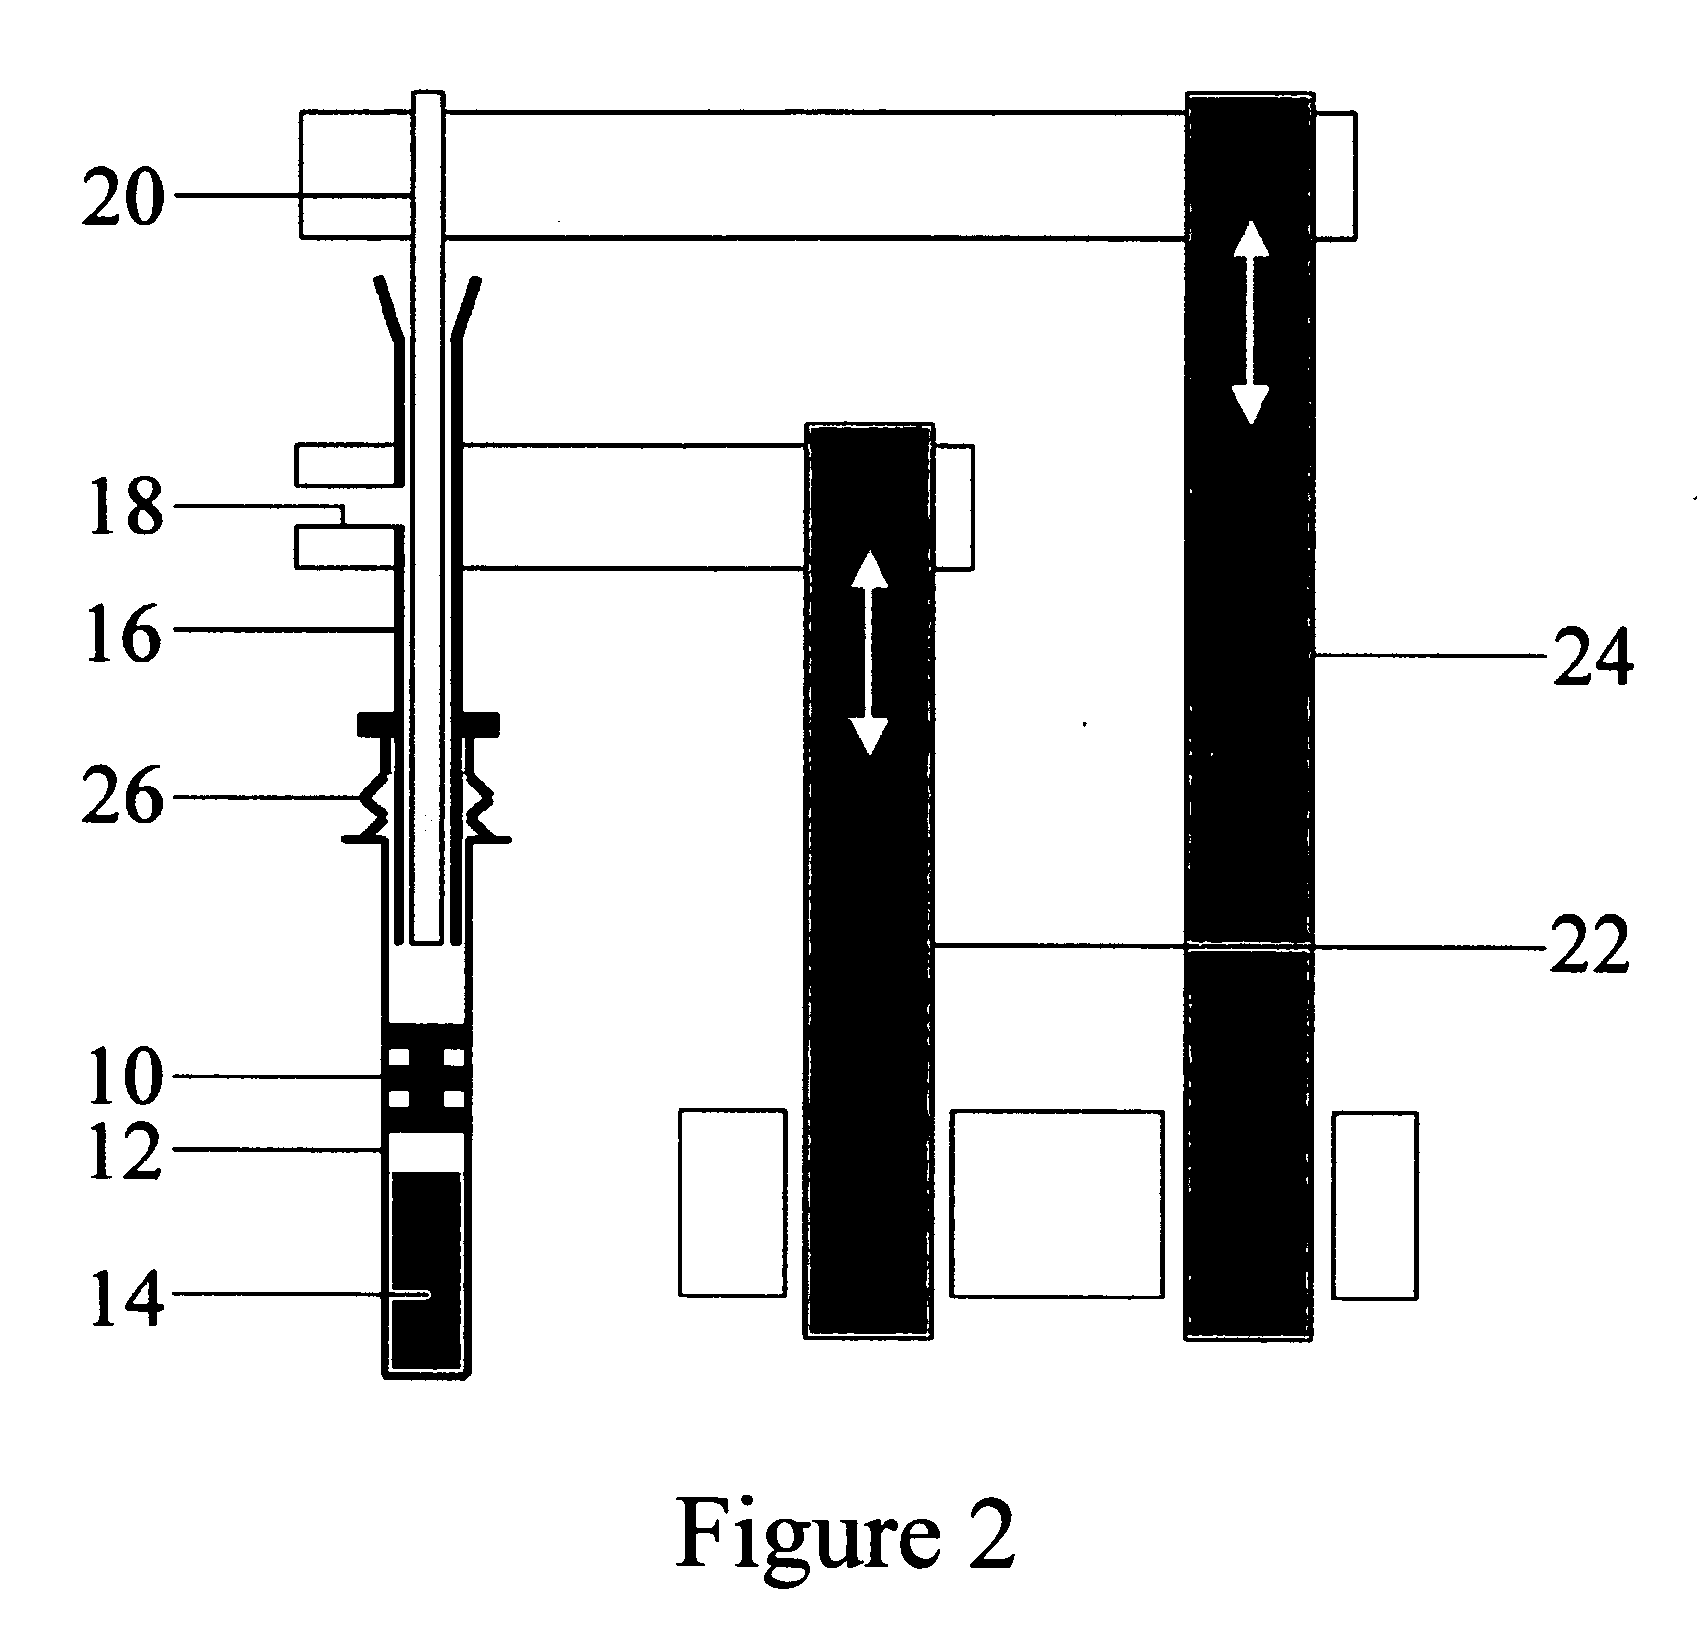 Method and apparatus to insert stoppers into prefilled syringes